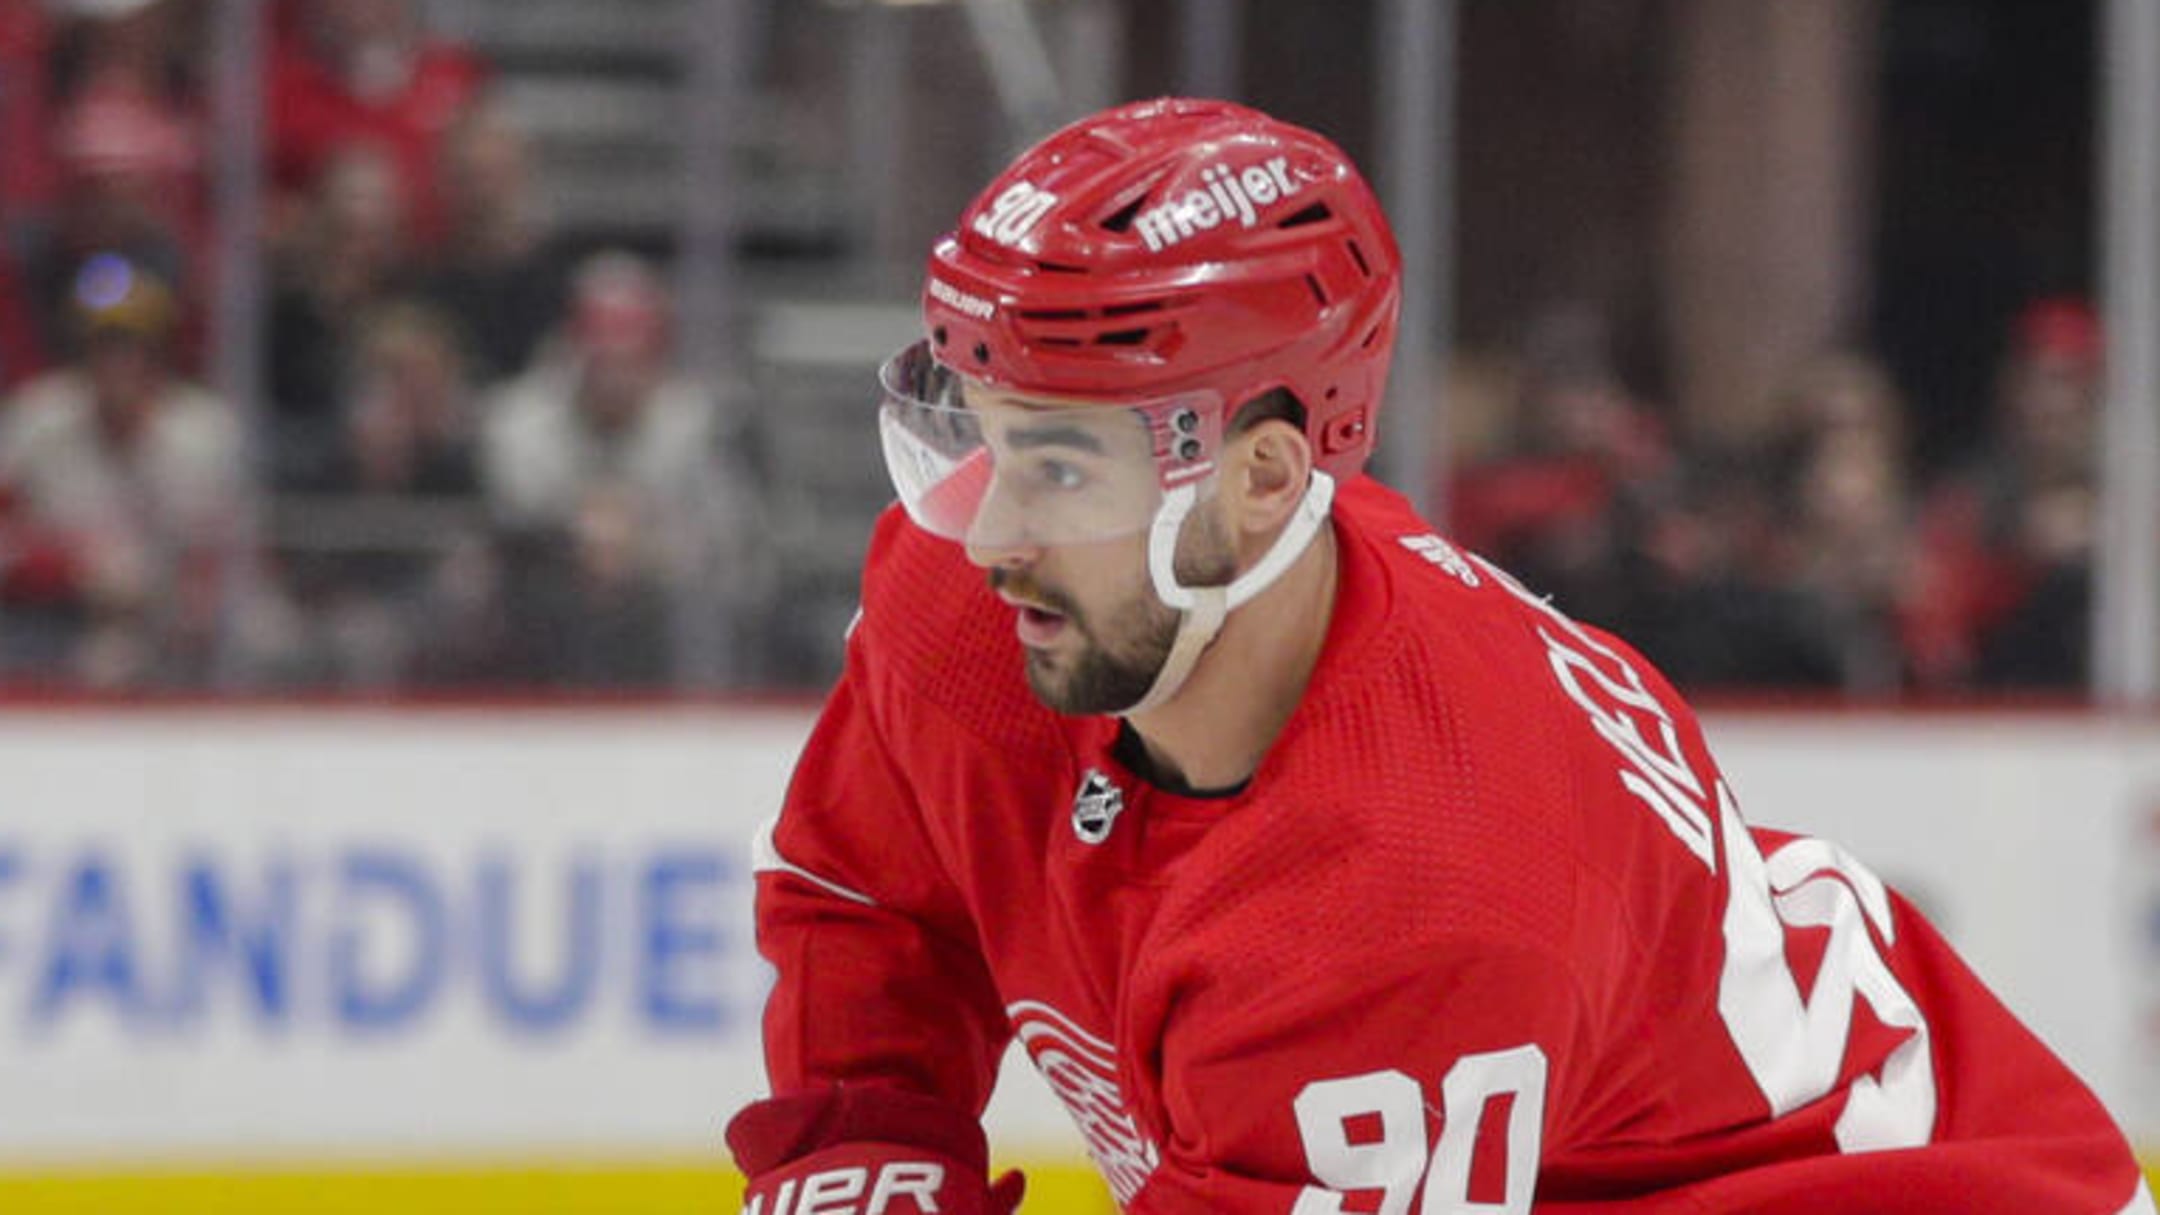 The #RedWings today signed defenseman - Detroit Red Wings